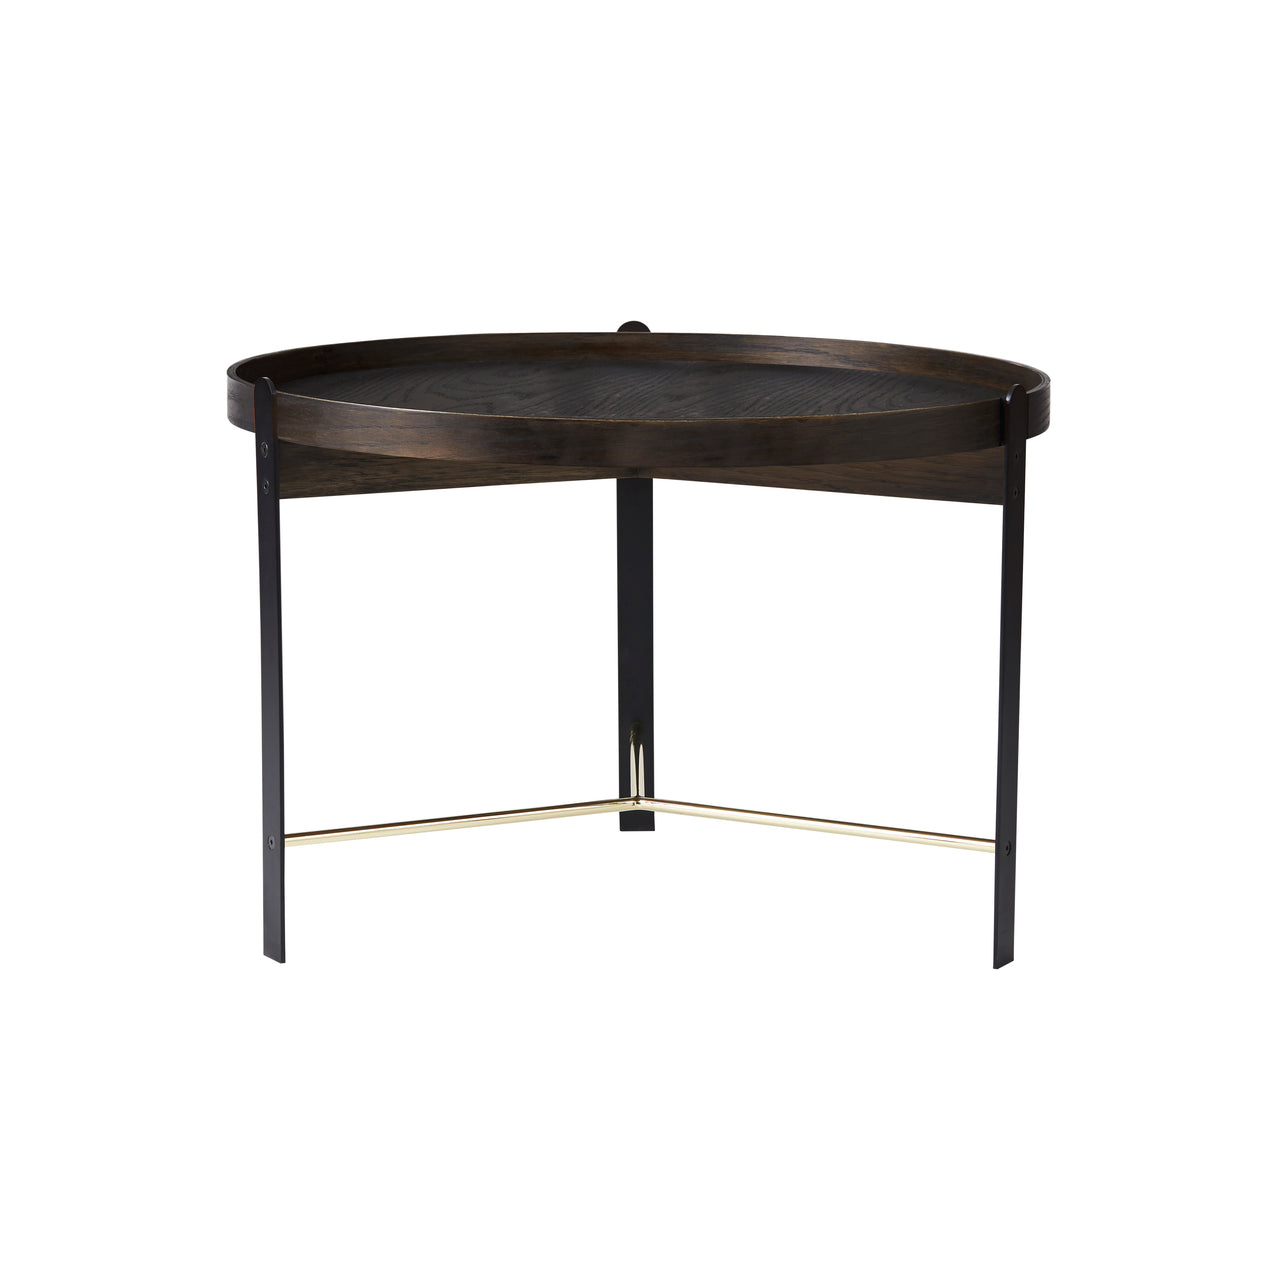 Compose Coffee Table: Large - 27.6